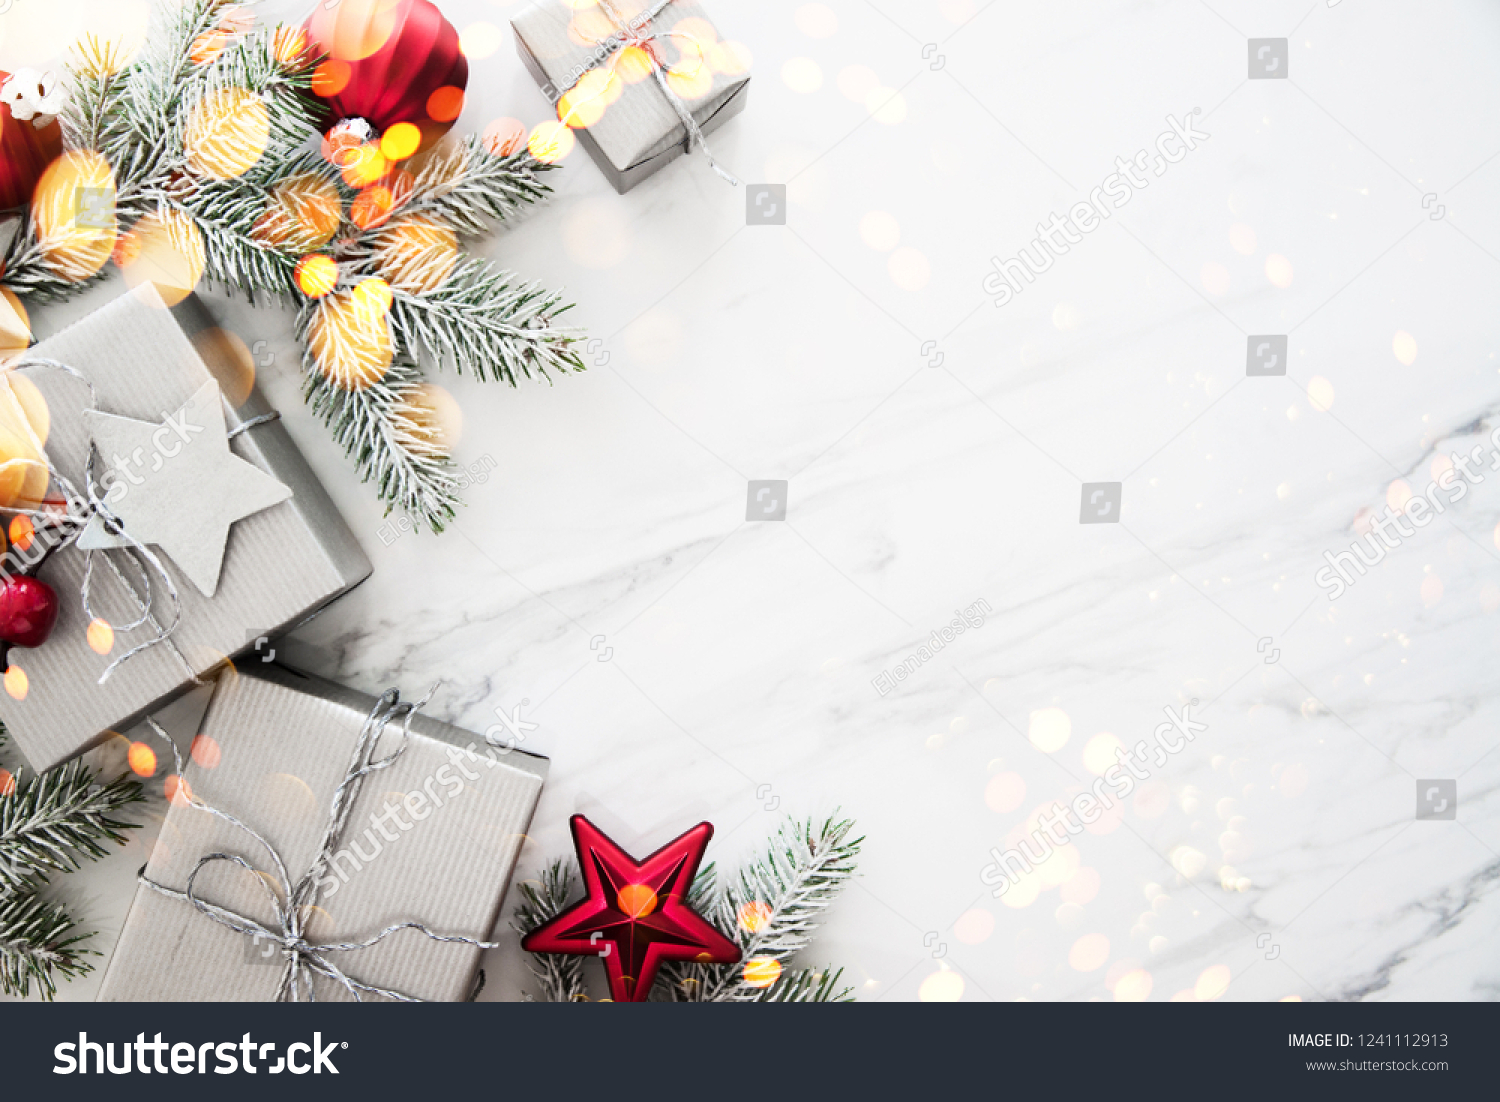 Merry Christmas and Happy Holidays greeting card, frame. New Year. Red, silver Christmas gifts, presents and ornaments on white marble background top view. Winter holiday xmas theme. Noel. Flat lay. #1241112913